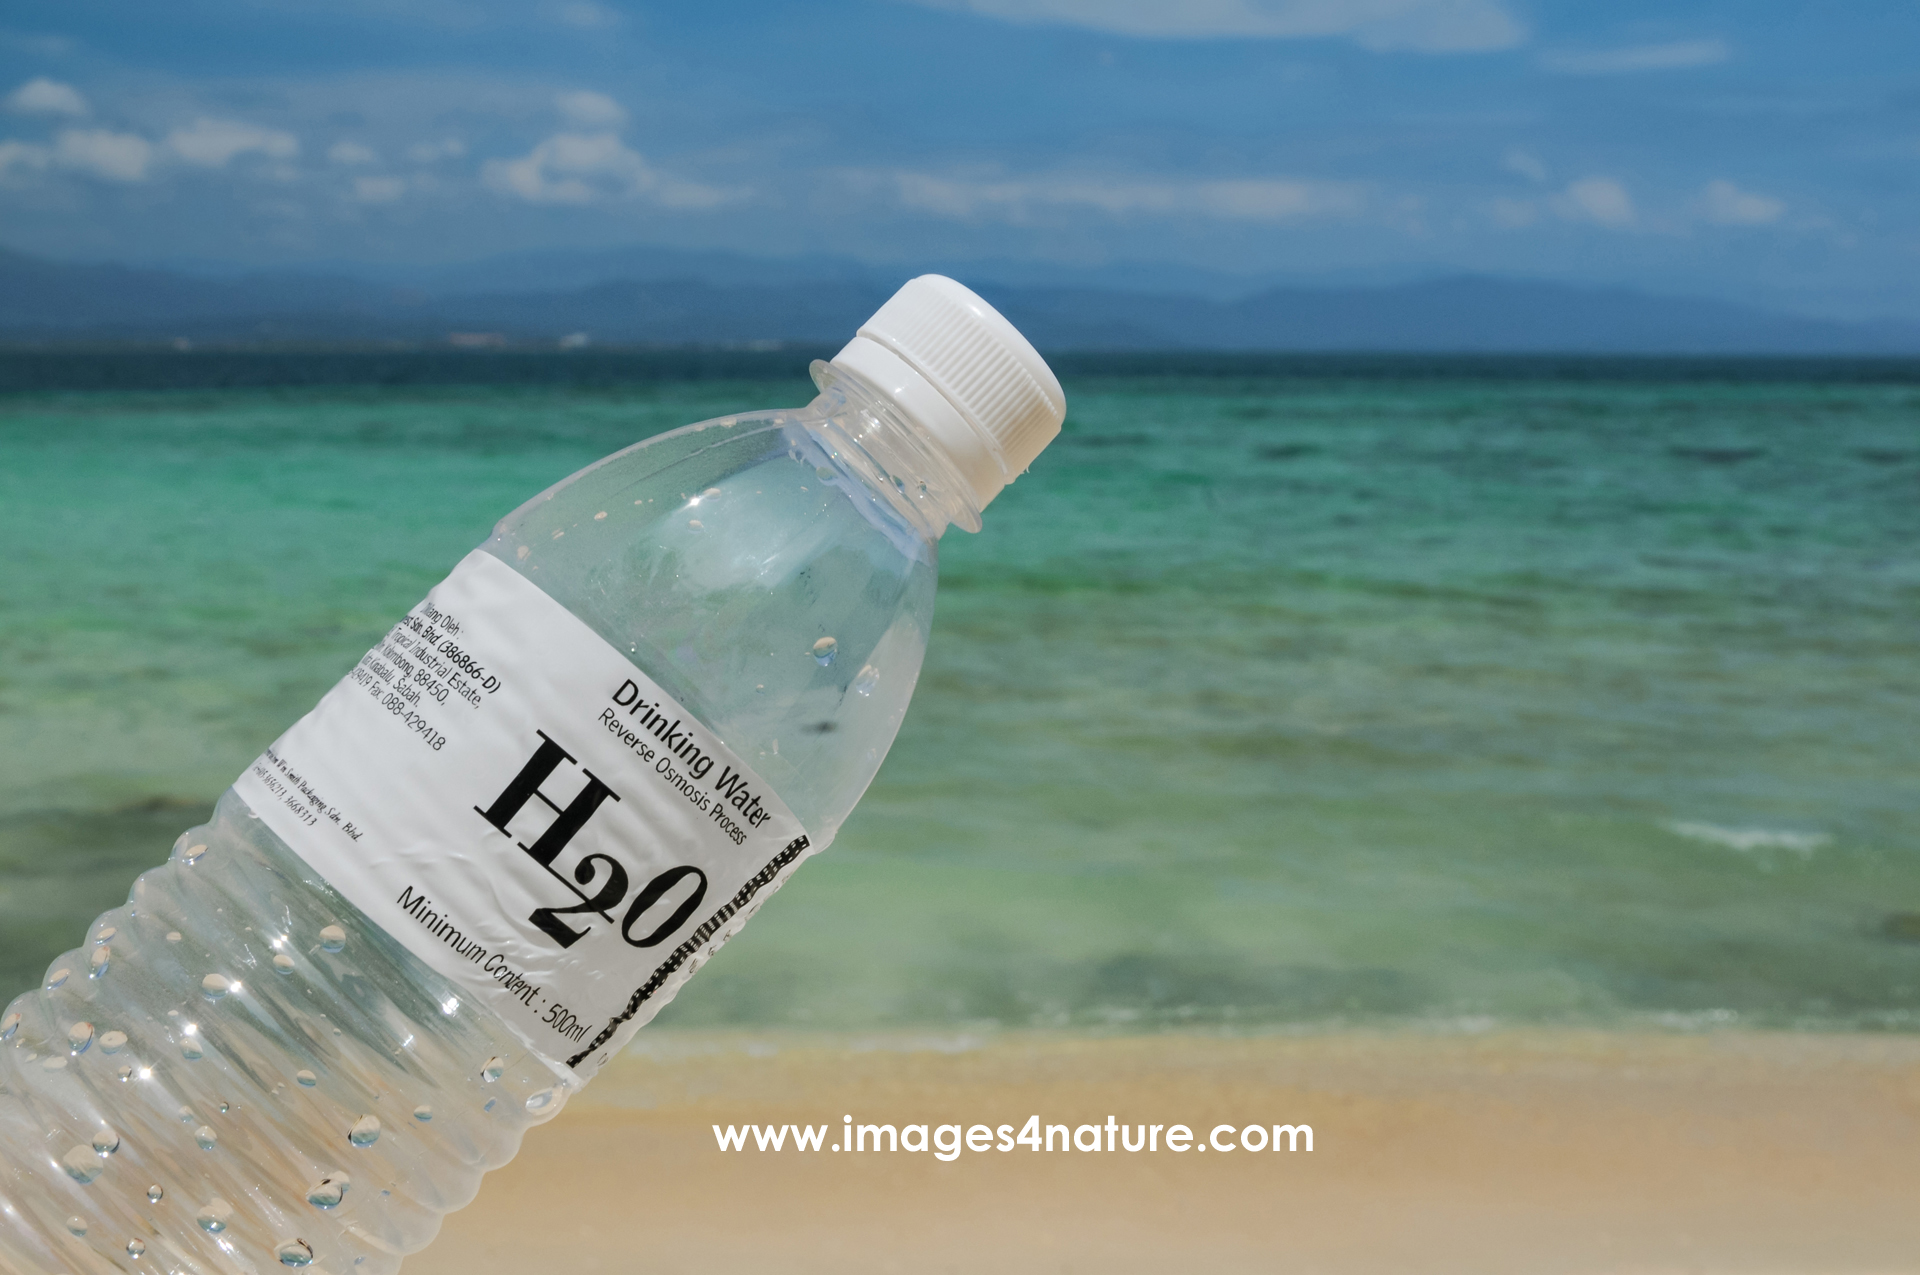 Empty plastic bottle against sandy beach, turquoise sea and sky